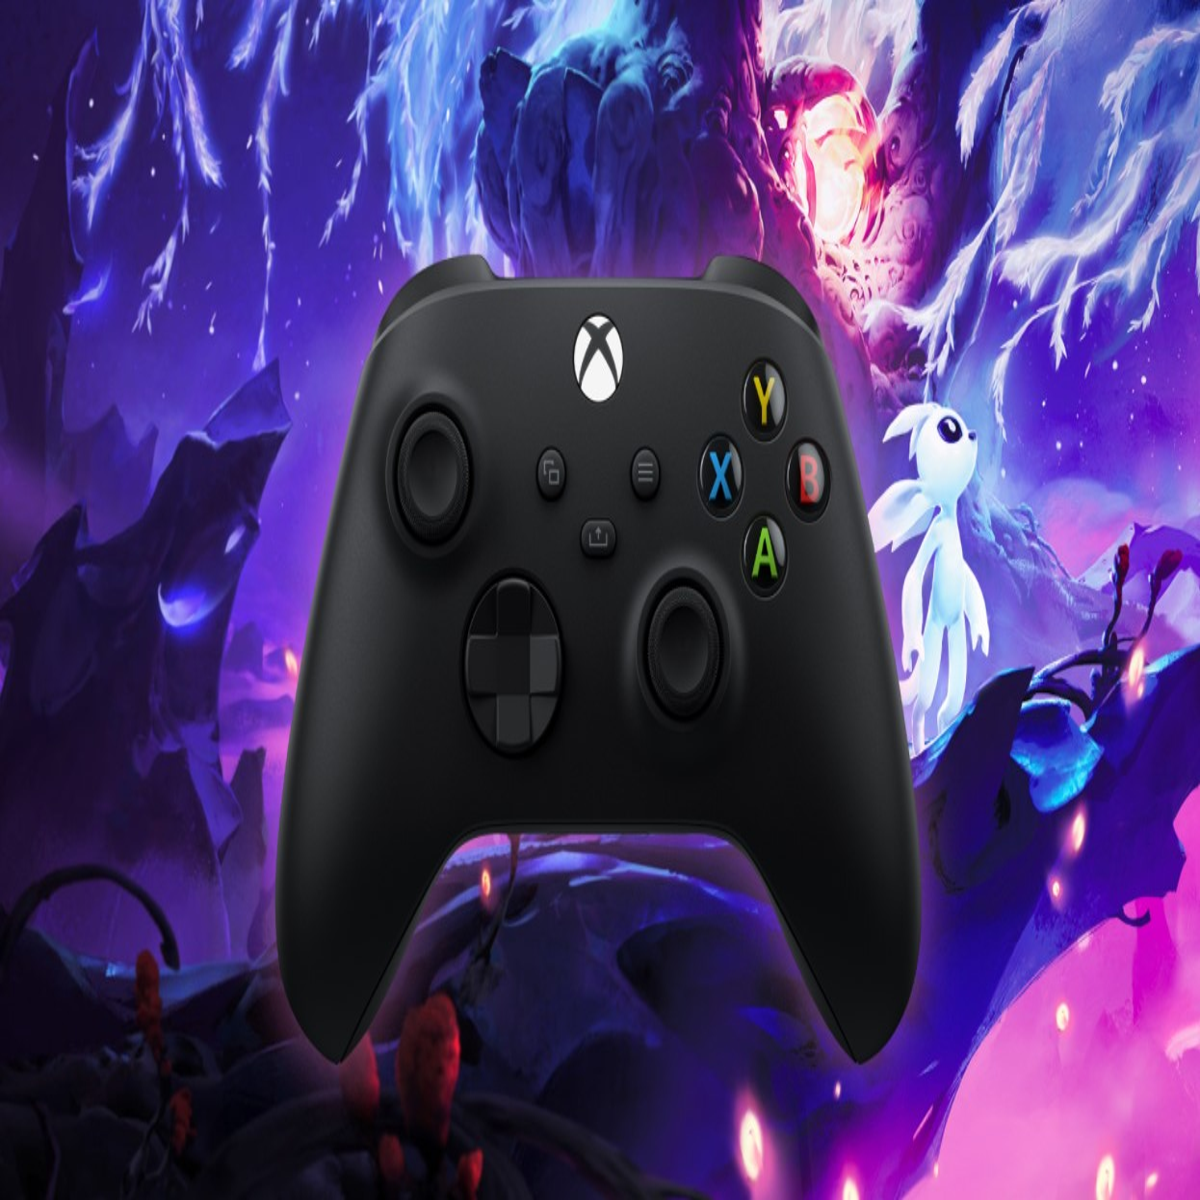 Players Drive Record Engagement as Xbox Expands Cloud Gaming to